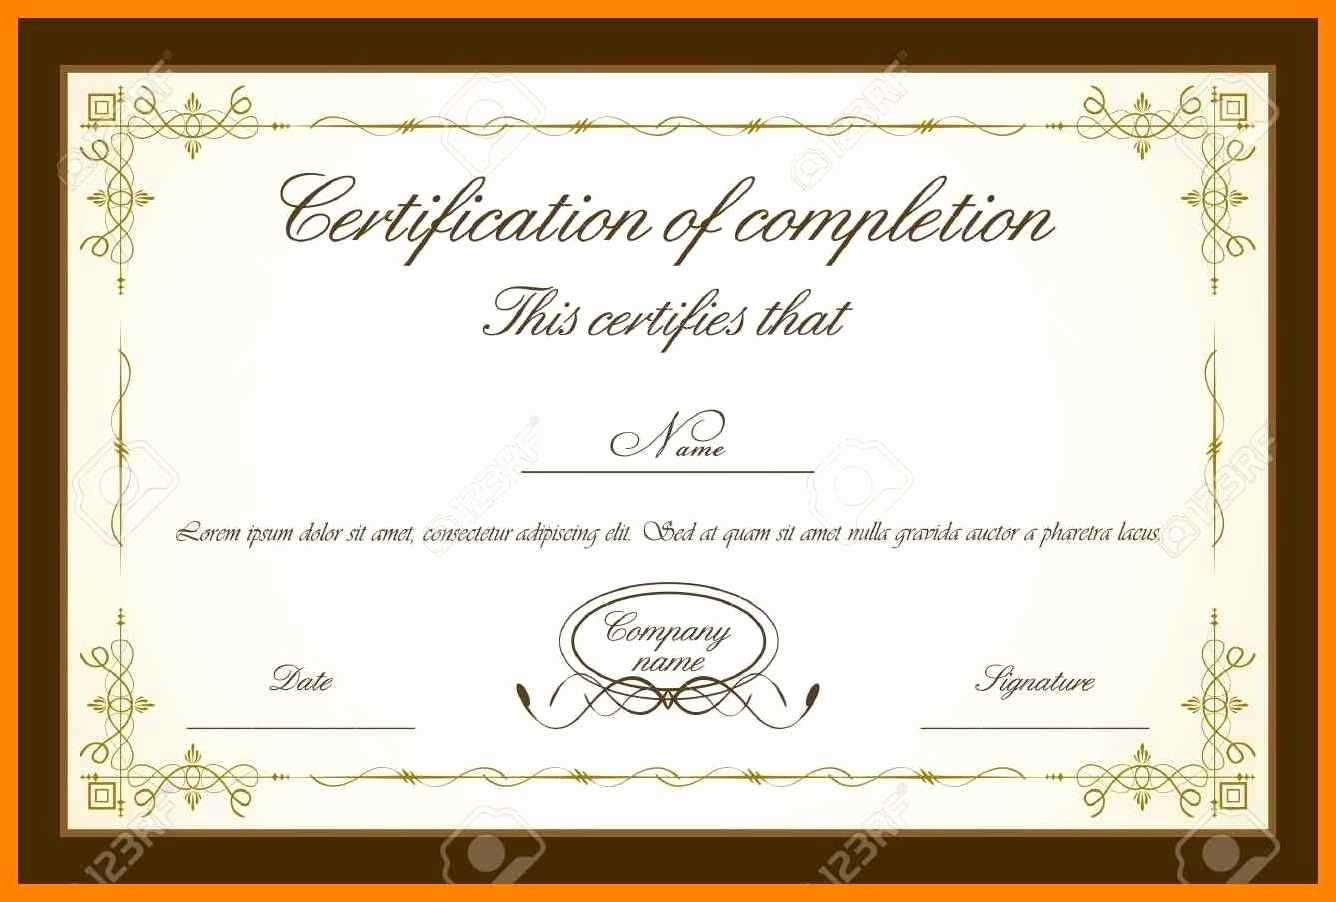 Awesome Pictures Of Certificate Templates Free Download Ppt With Regard To Powerpoint Certificate Templates Free Download